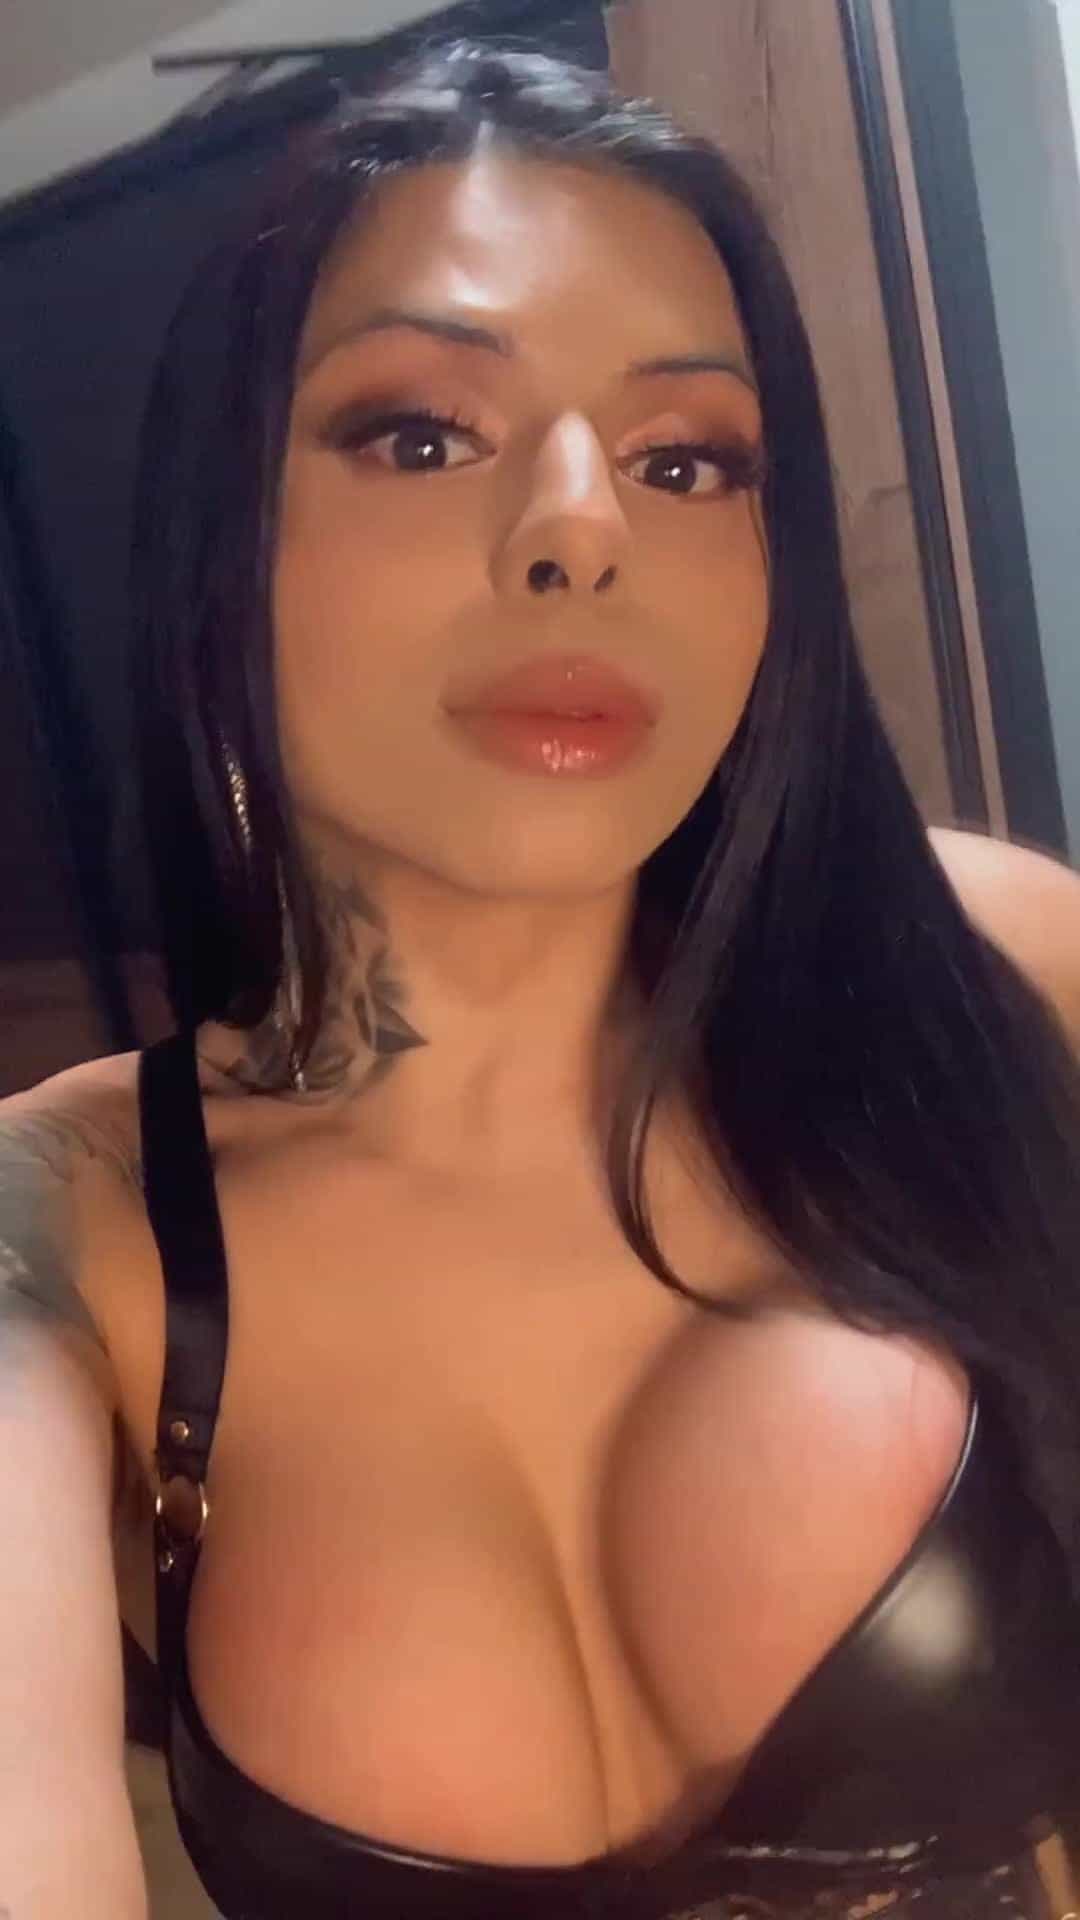 My top can barely hold my boobs 😛😛